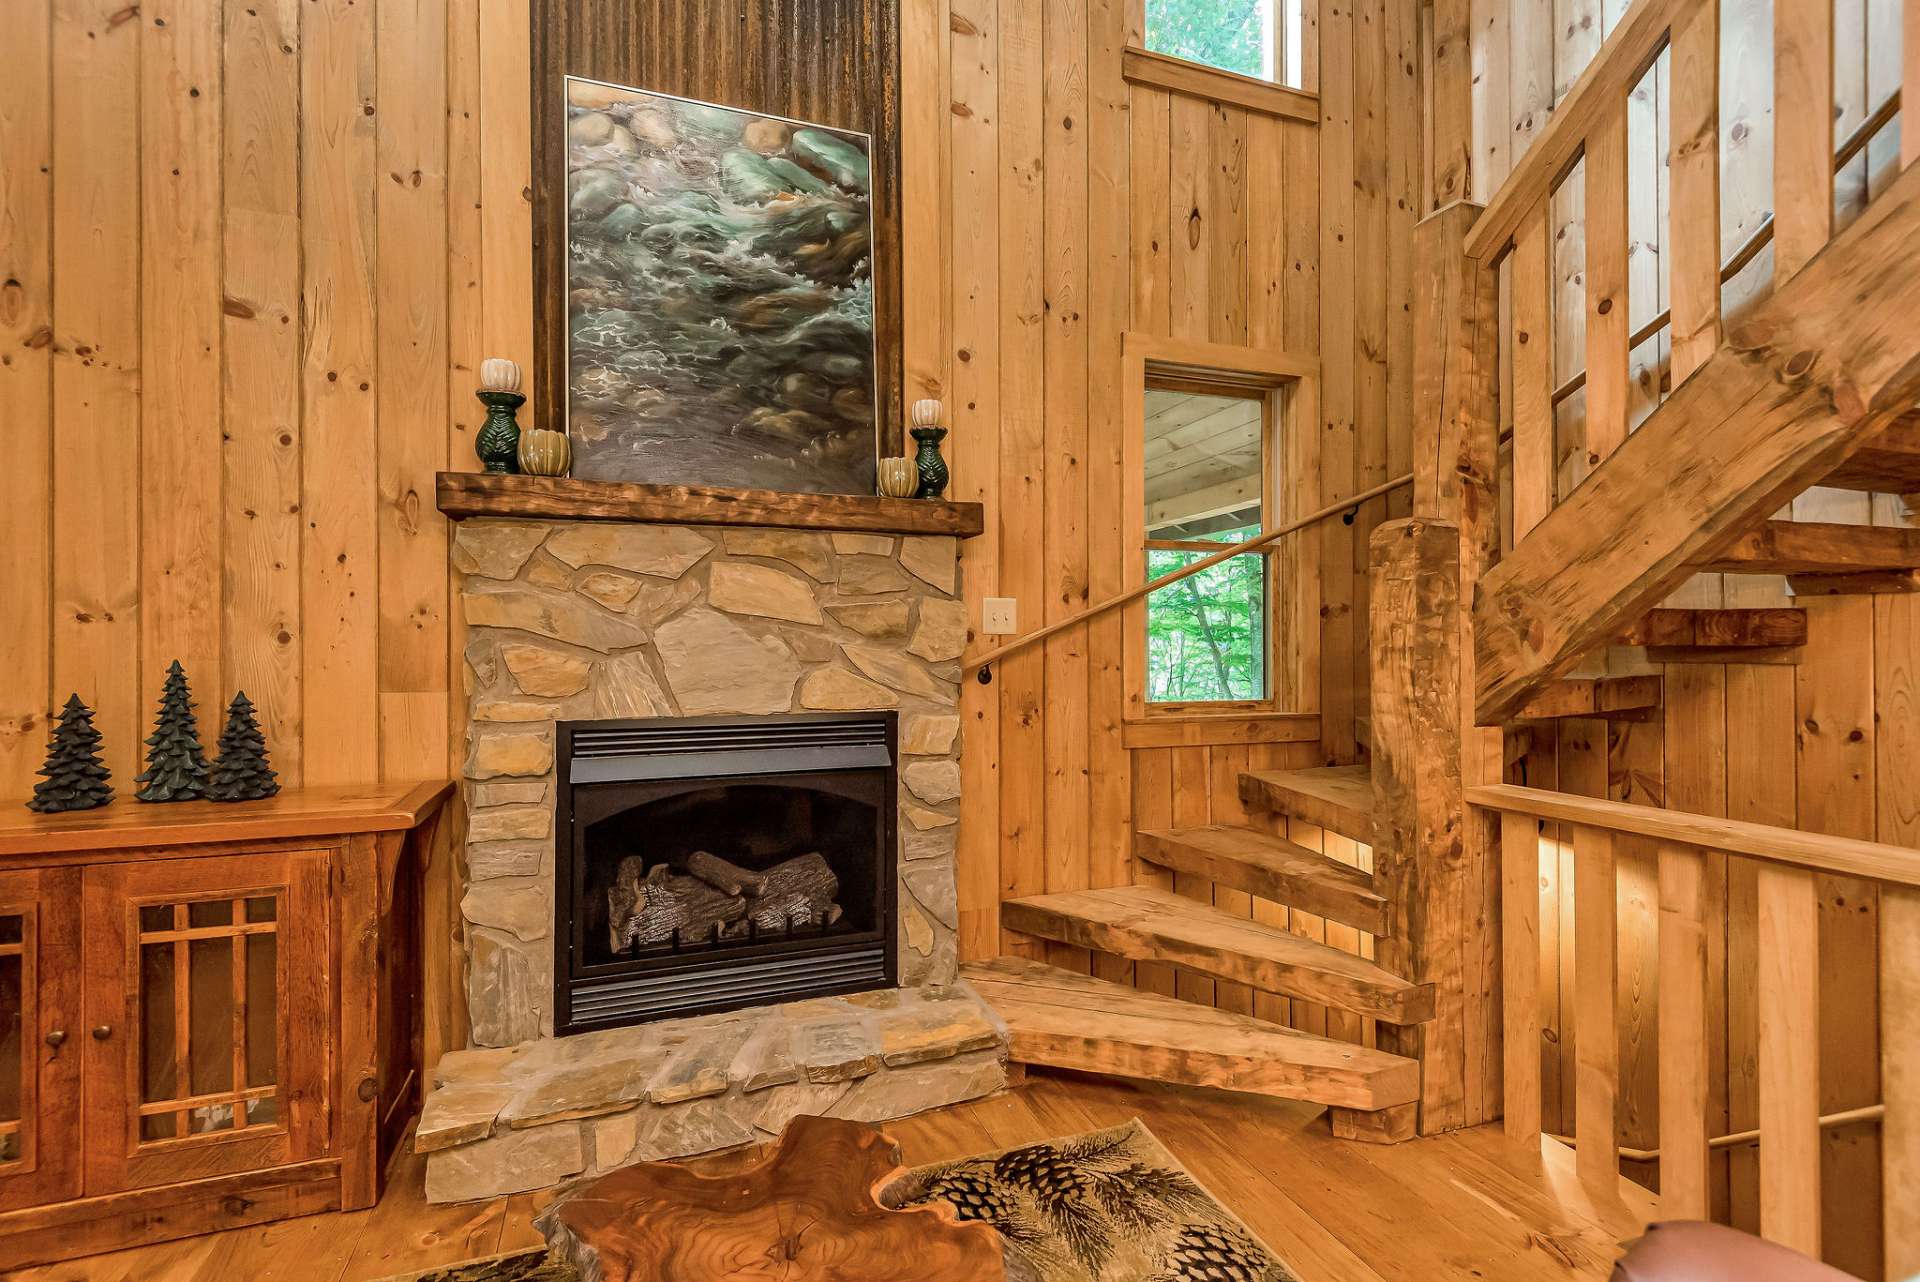 The stone fireplace is perfect for cozying up to on cool fall or winter days.